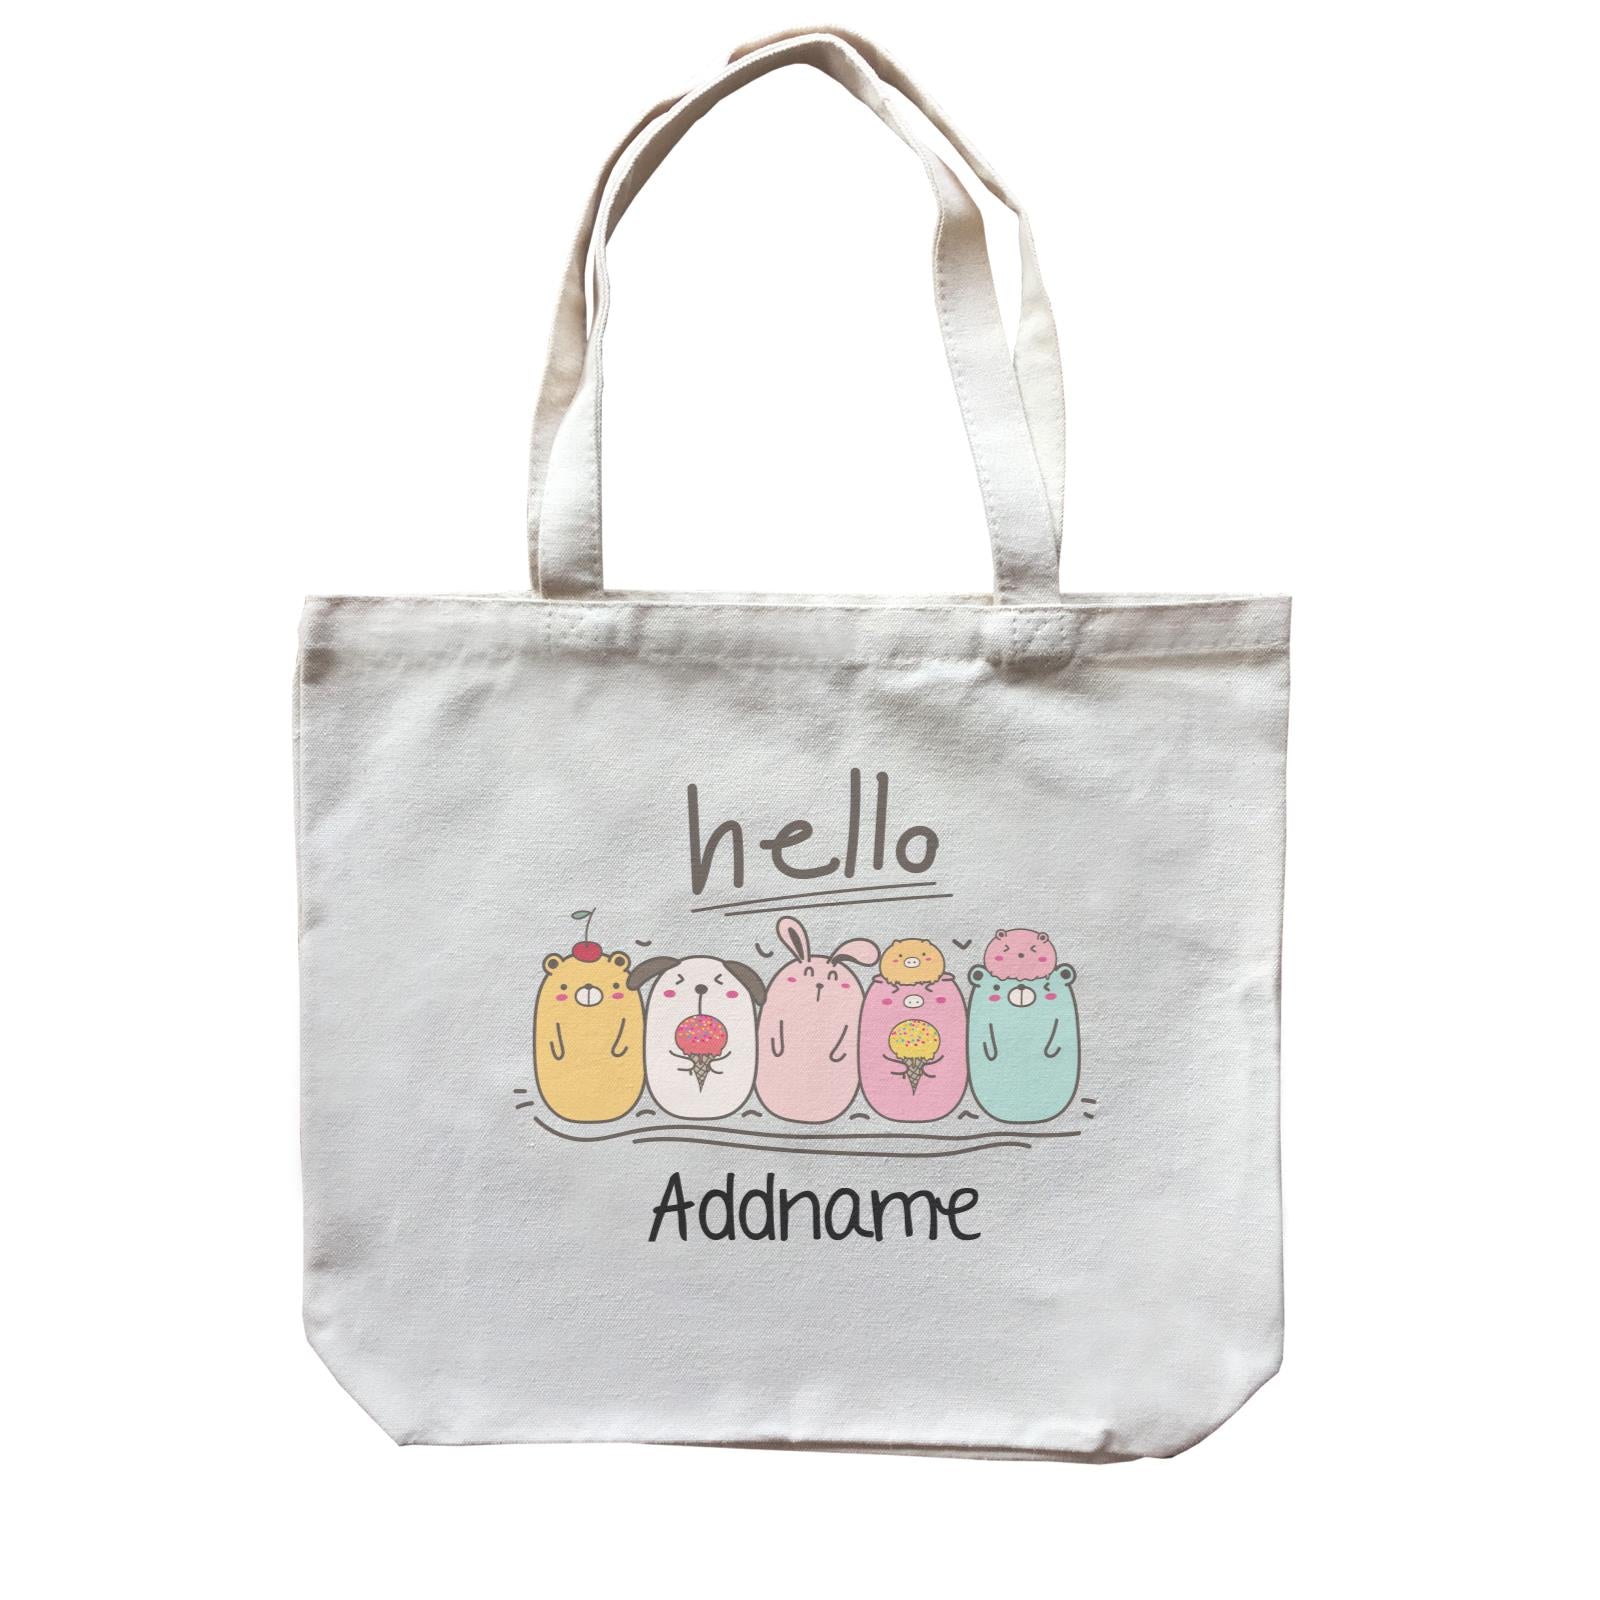 Cute Animals And Friends Series Cute Animals Ice Cream Group Addname Canvas Bag